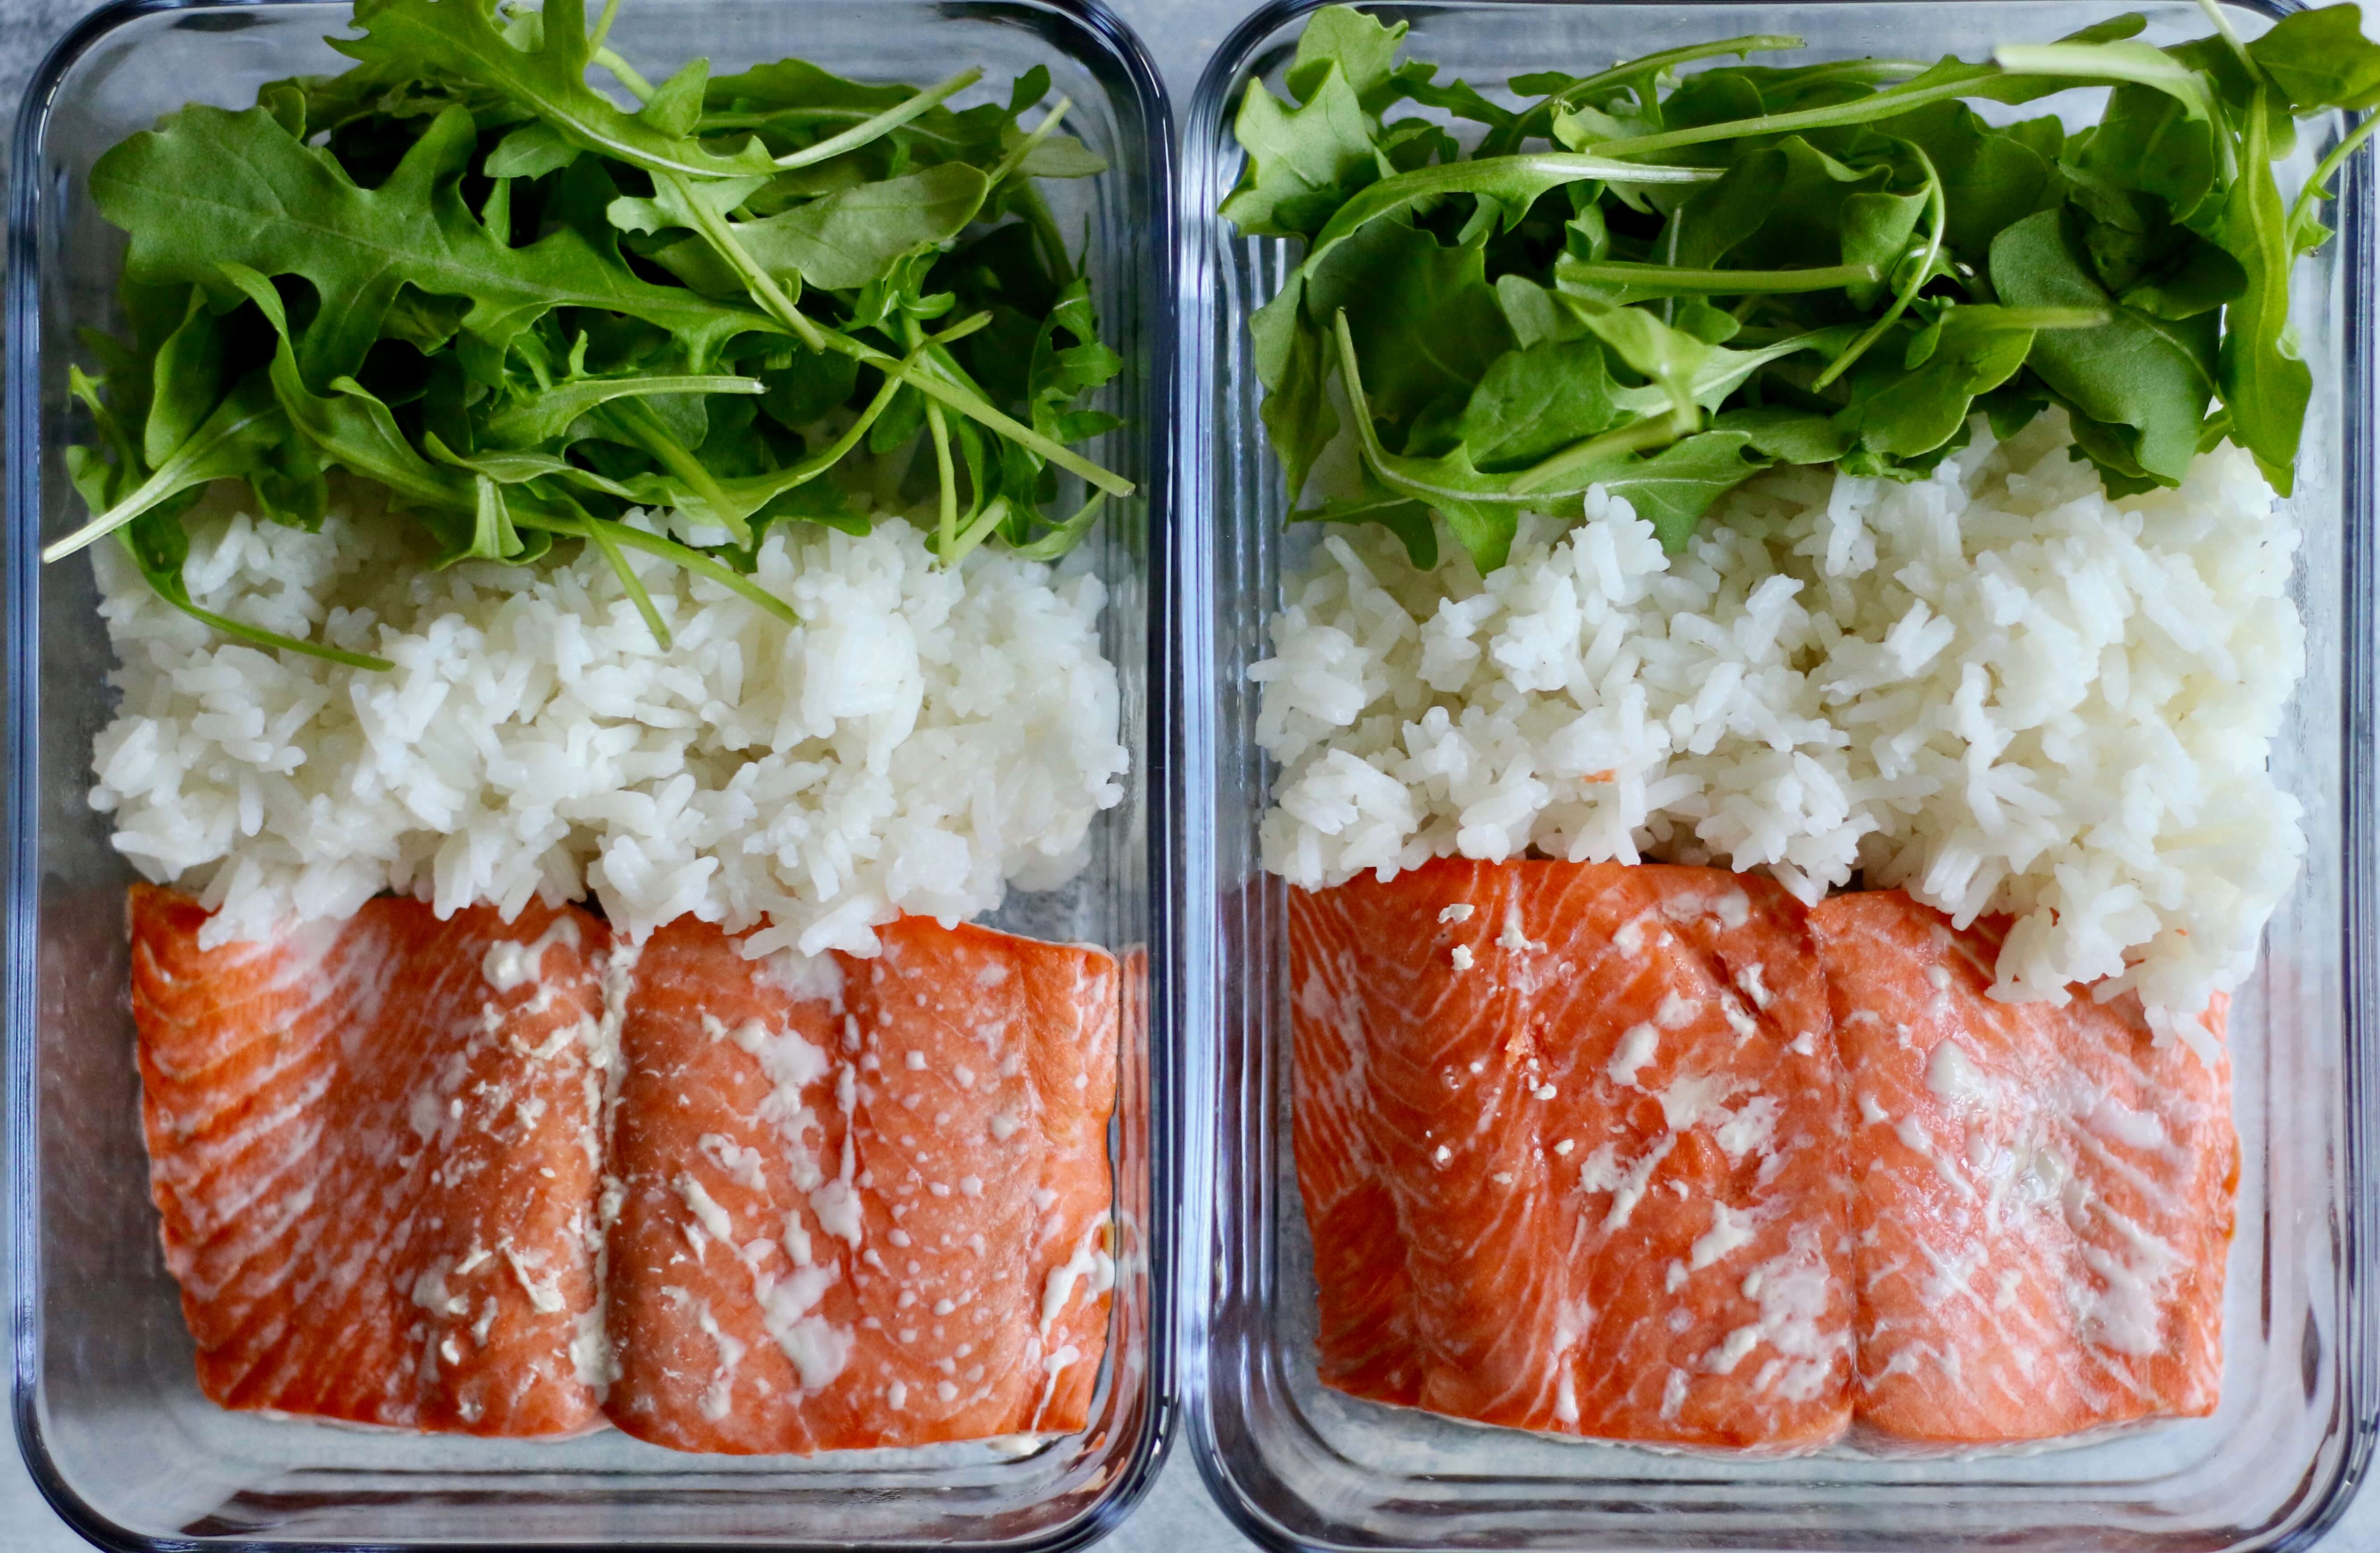 20 Simple Meals to Help Your Clients Hit Their Macros: Salmon, Rice & Arugula